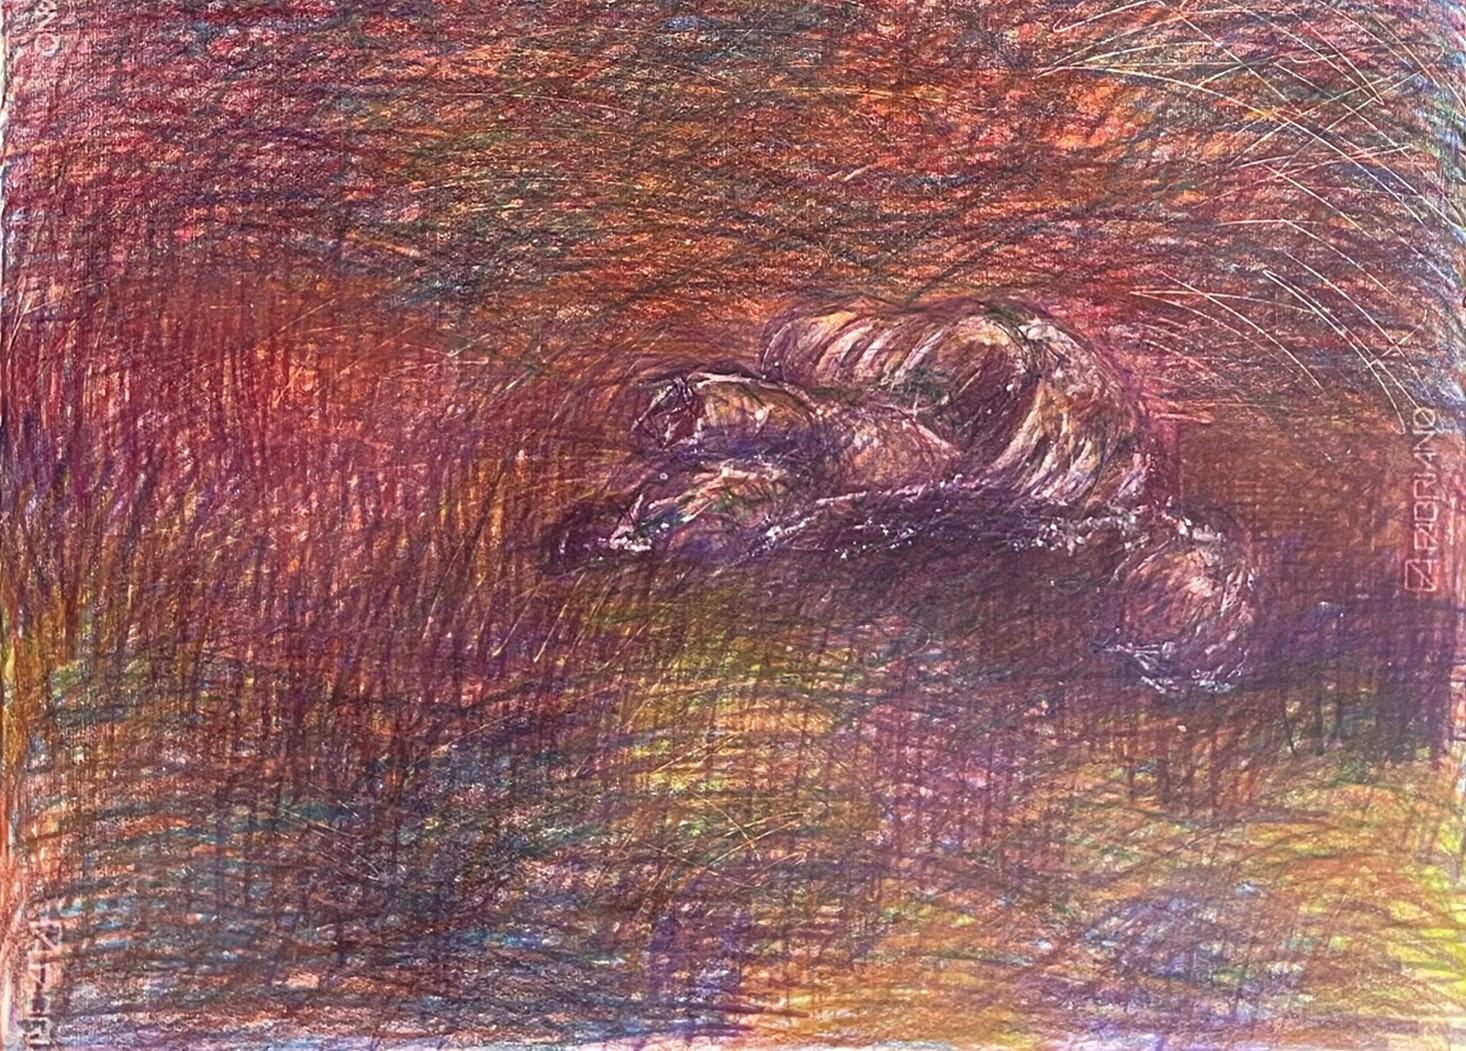 Untitled_Body on the Field #4, 2022
coloured pencils on paper
39 3/8 H x 27 9/16 W inches
100 H x 70 W cm

Signed on reverse

Zsolt Berszán embodies in his works the dissolution of the human body through the prism of the fragment, the body in